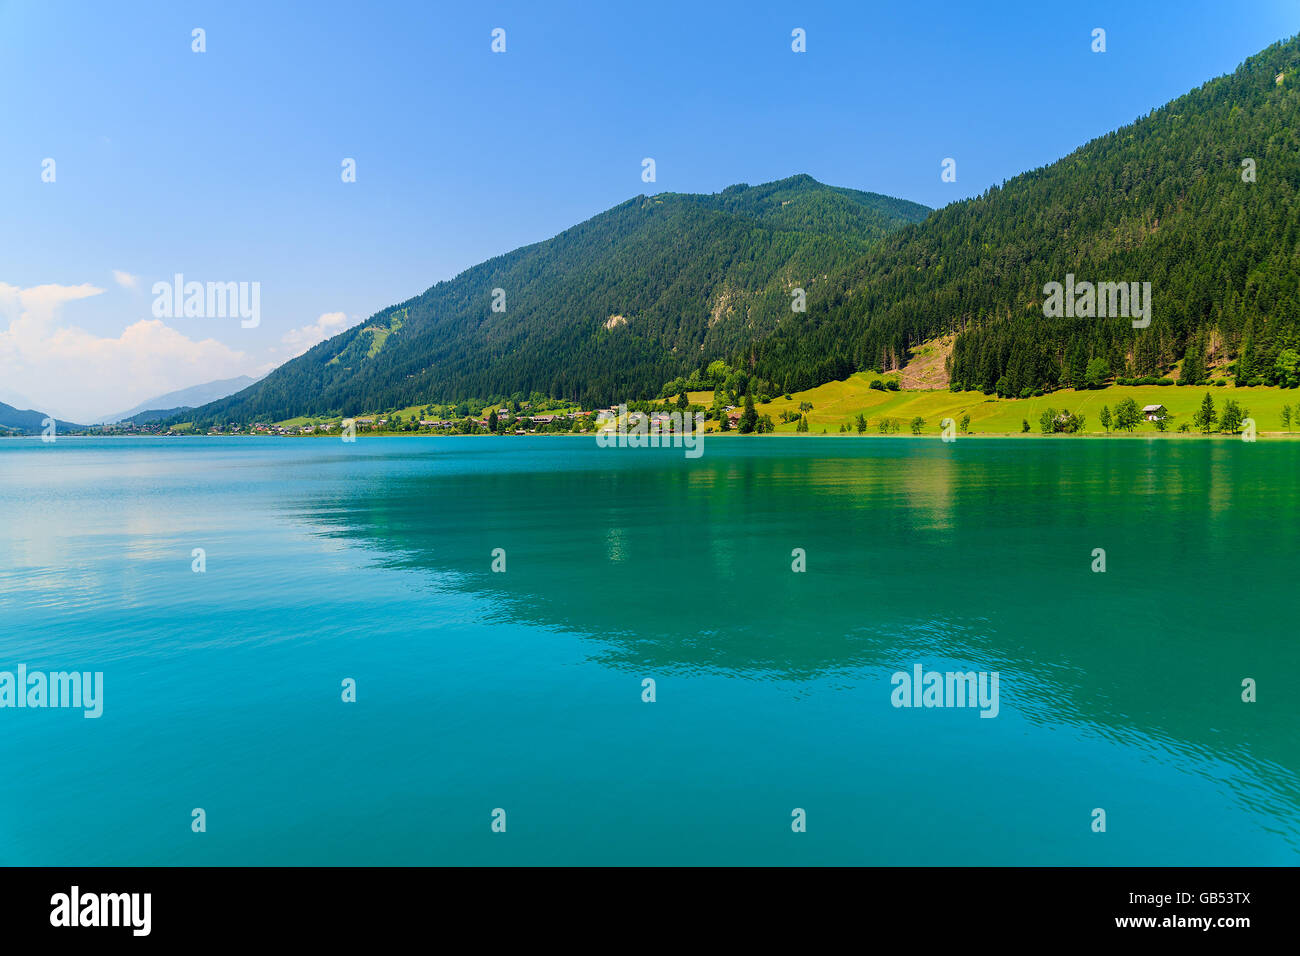 Green water Weissensee lake in Alps Mountains, Austria Stock Photo